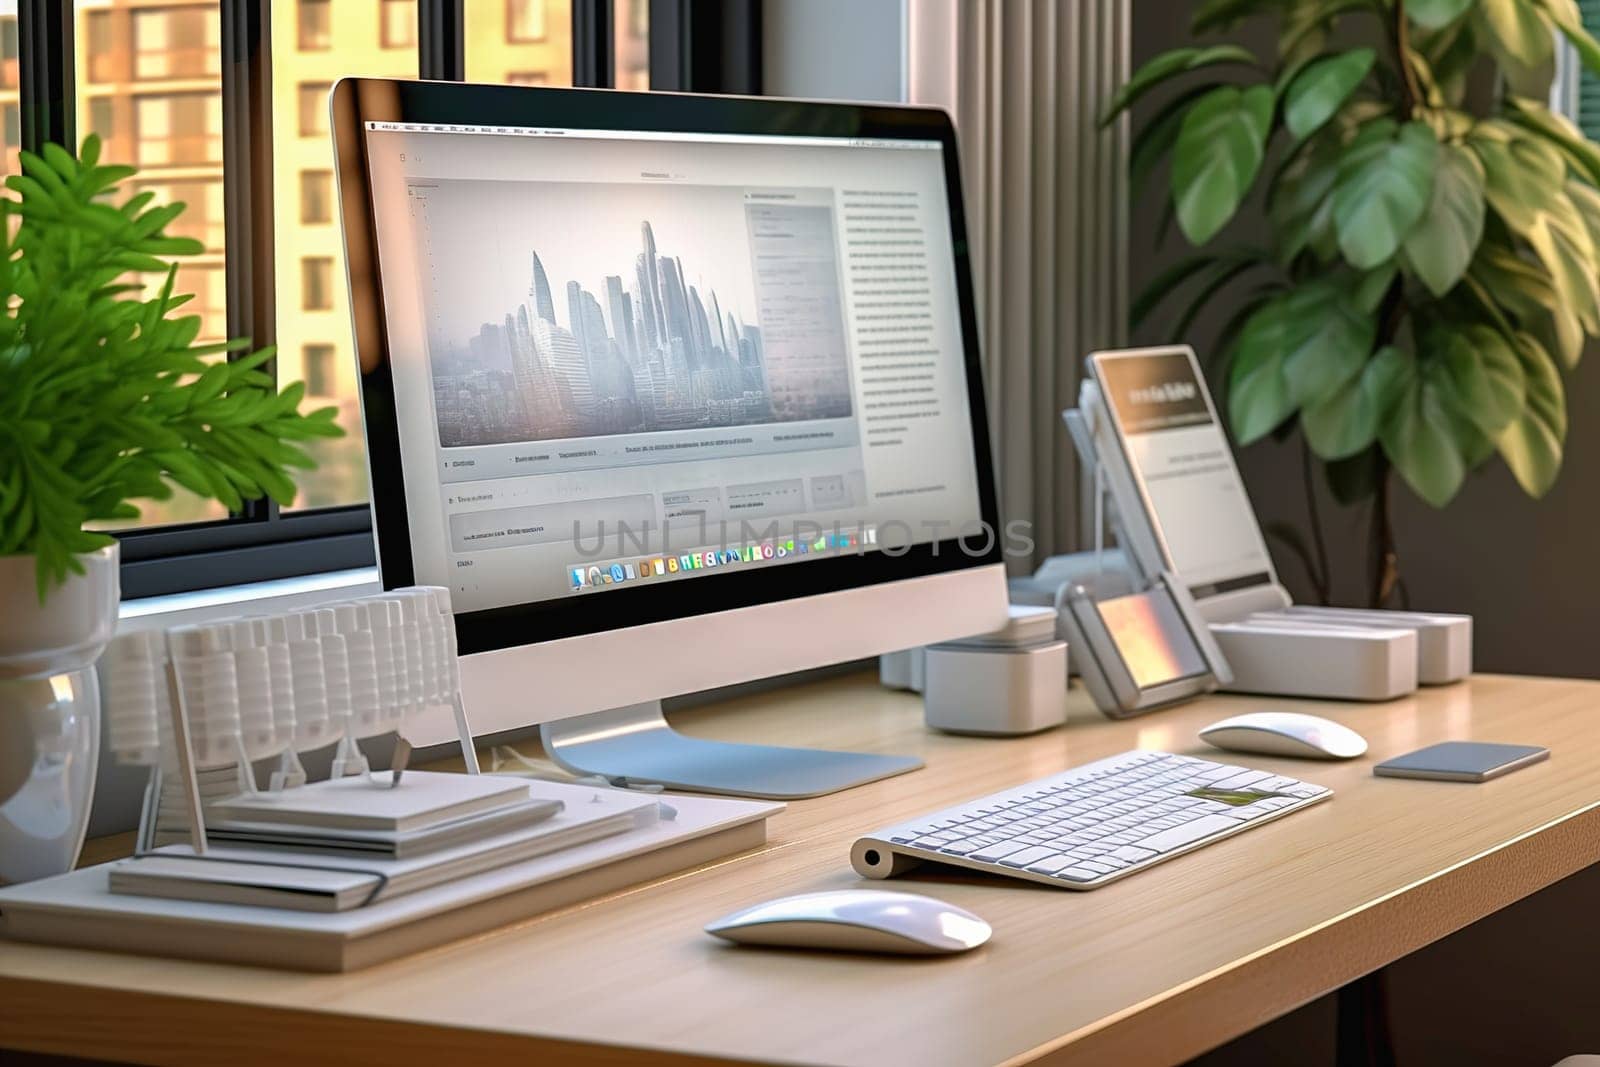 Desktop computer and office supplies on the desktop. High quality photo